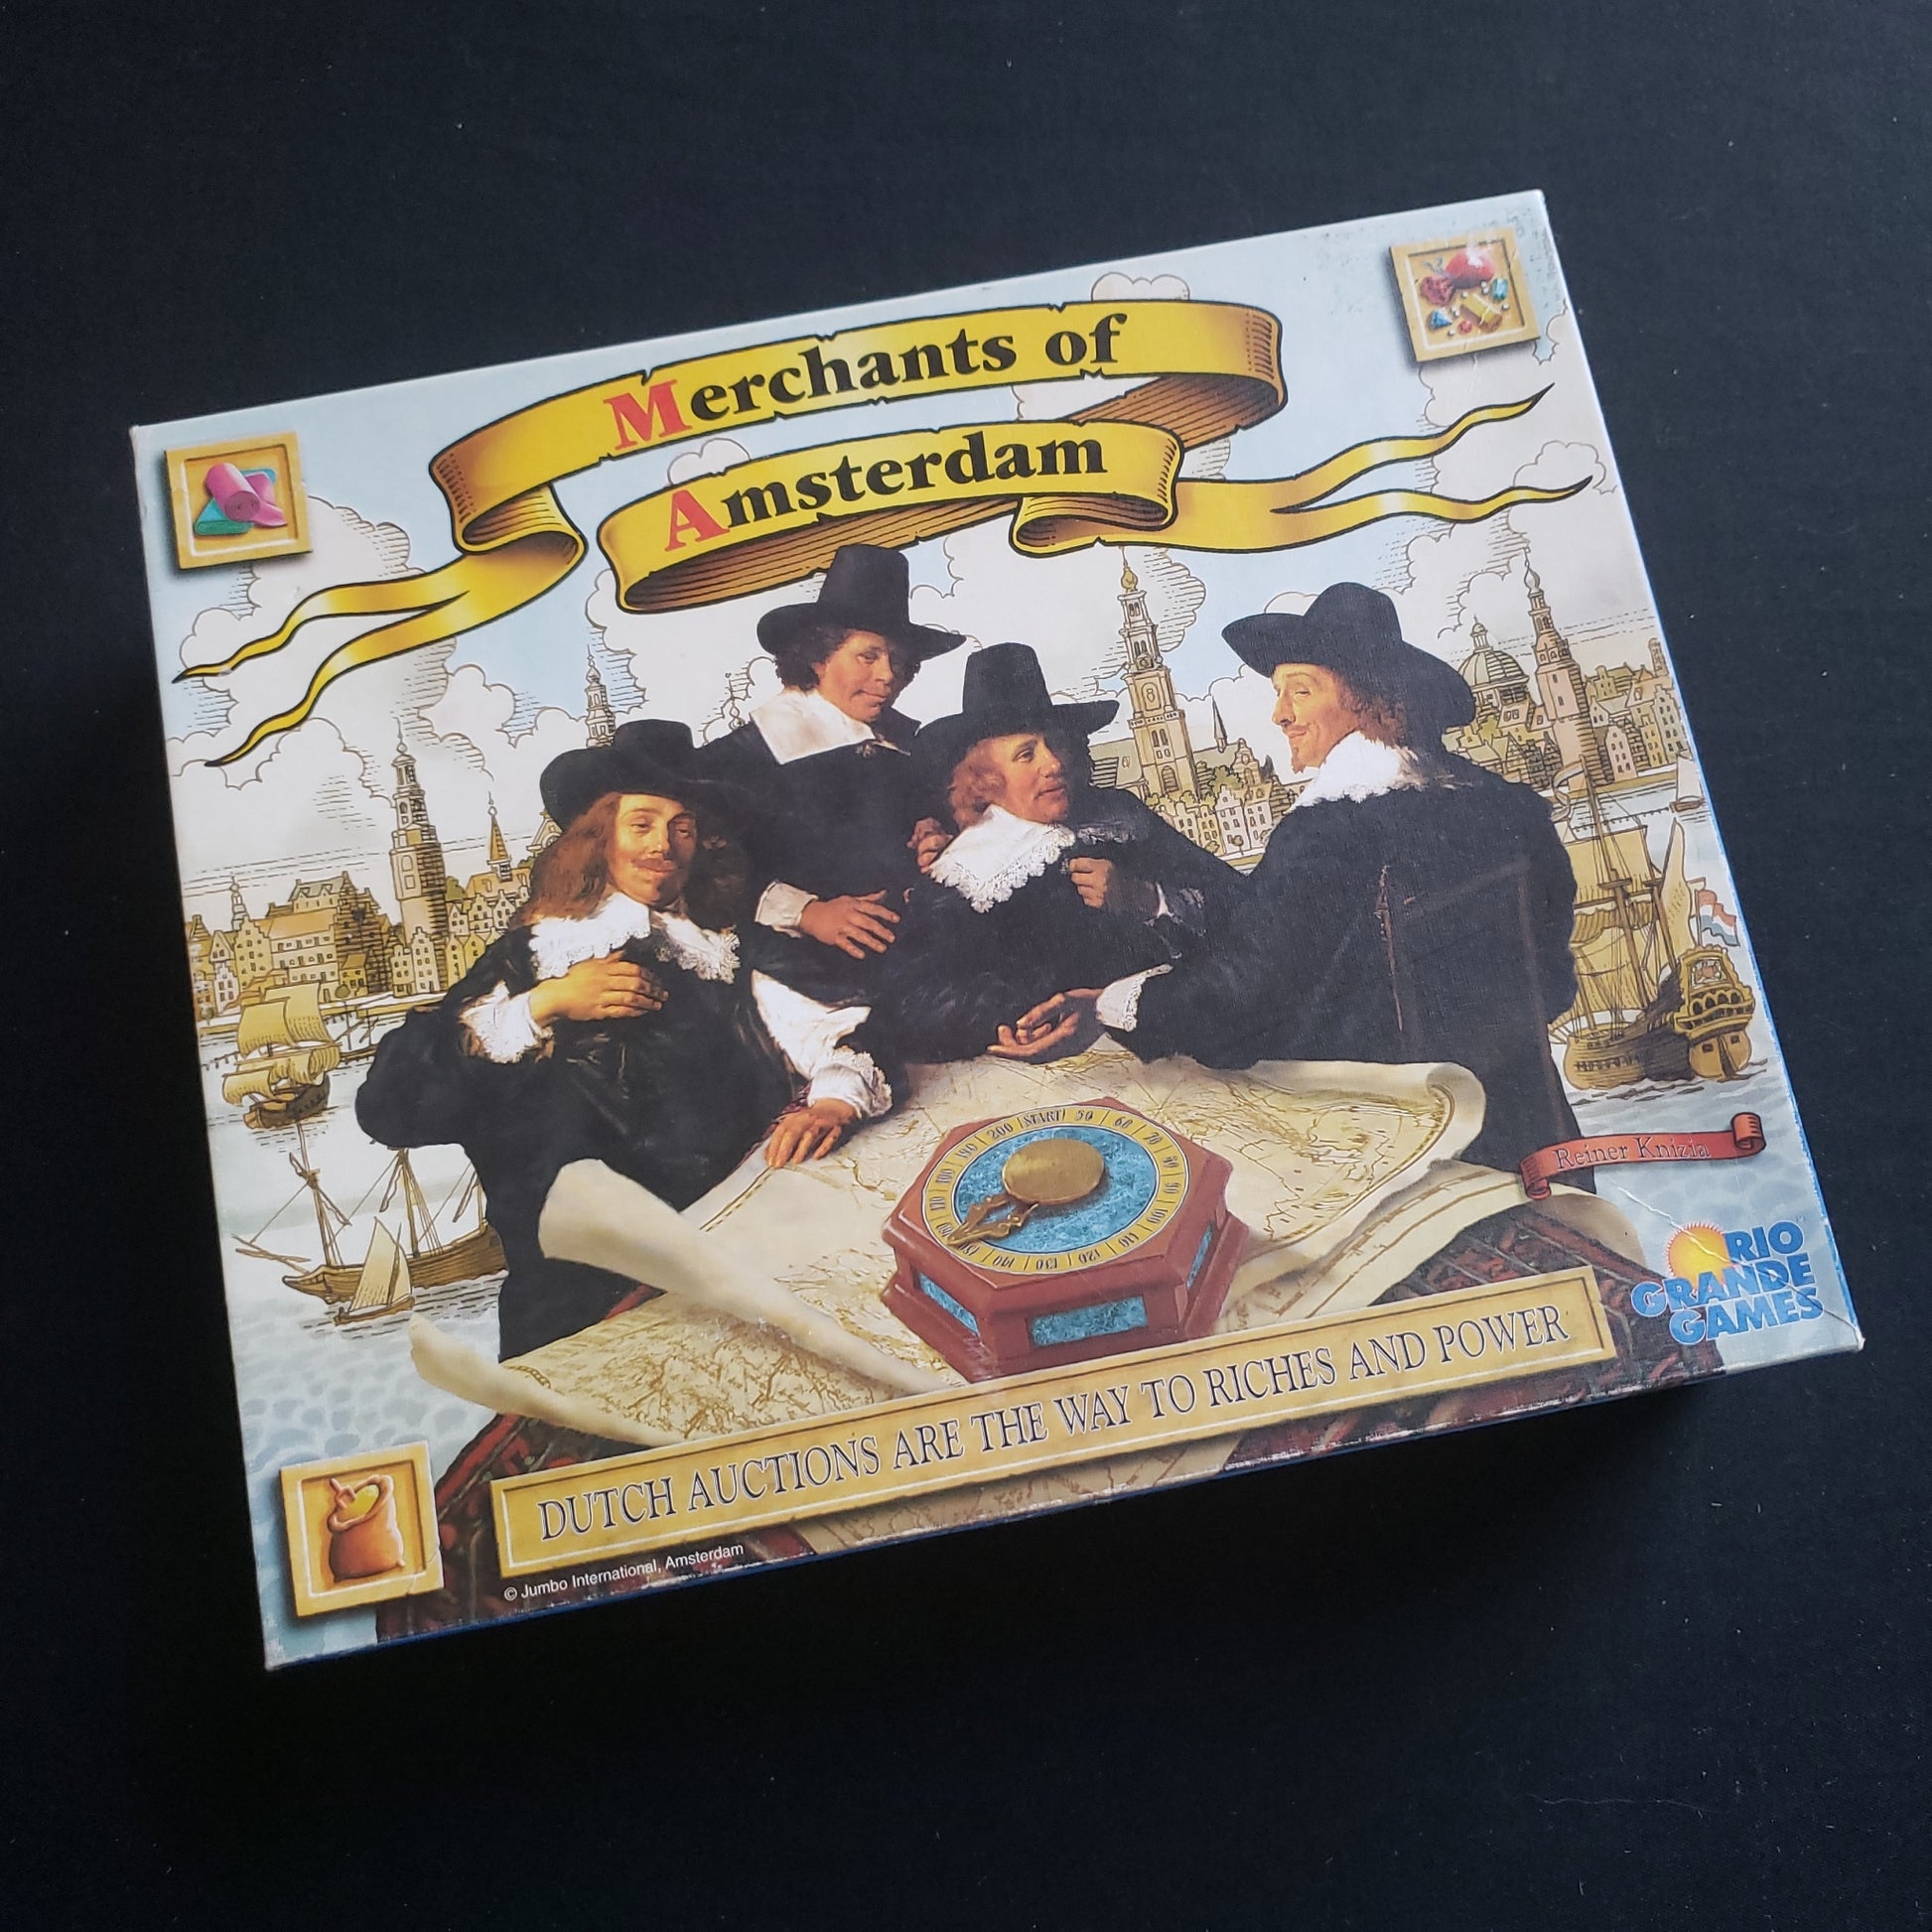 Image shows the front cover of the box of the Merchants of Amsterdam board game